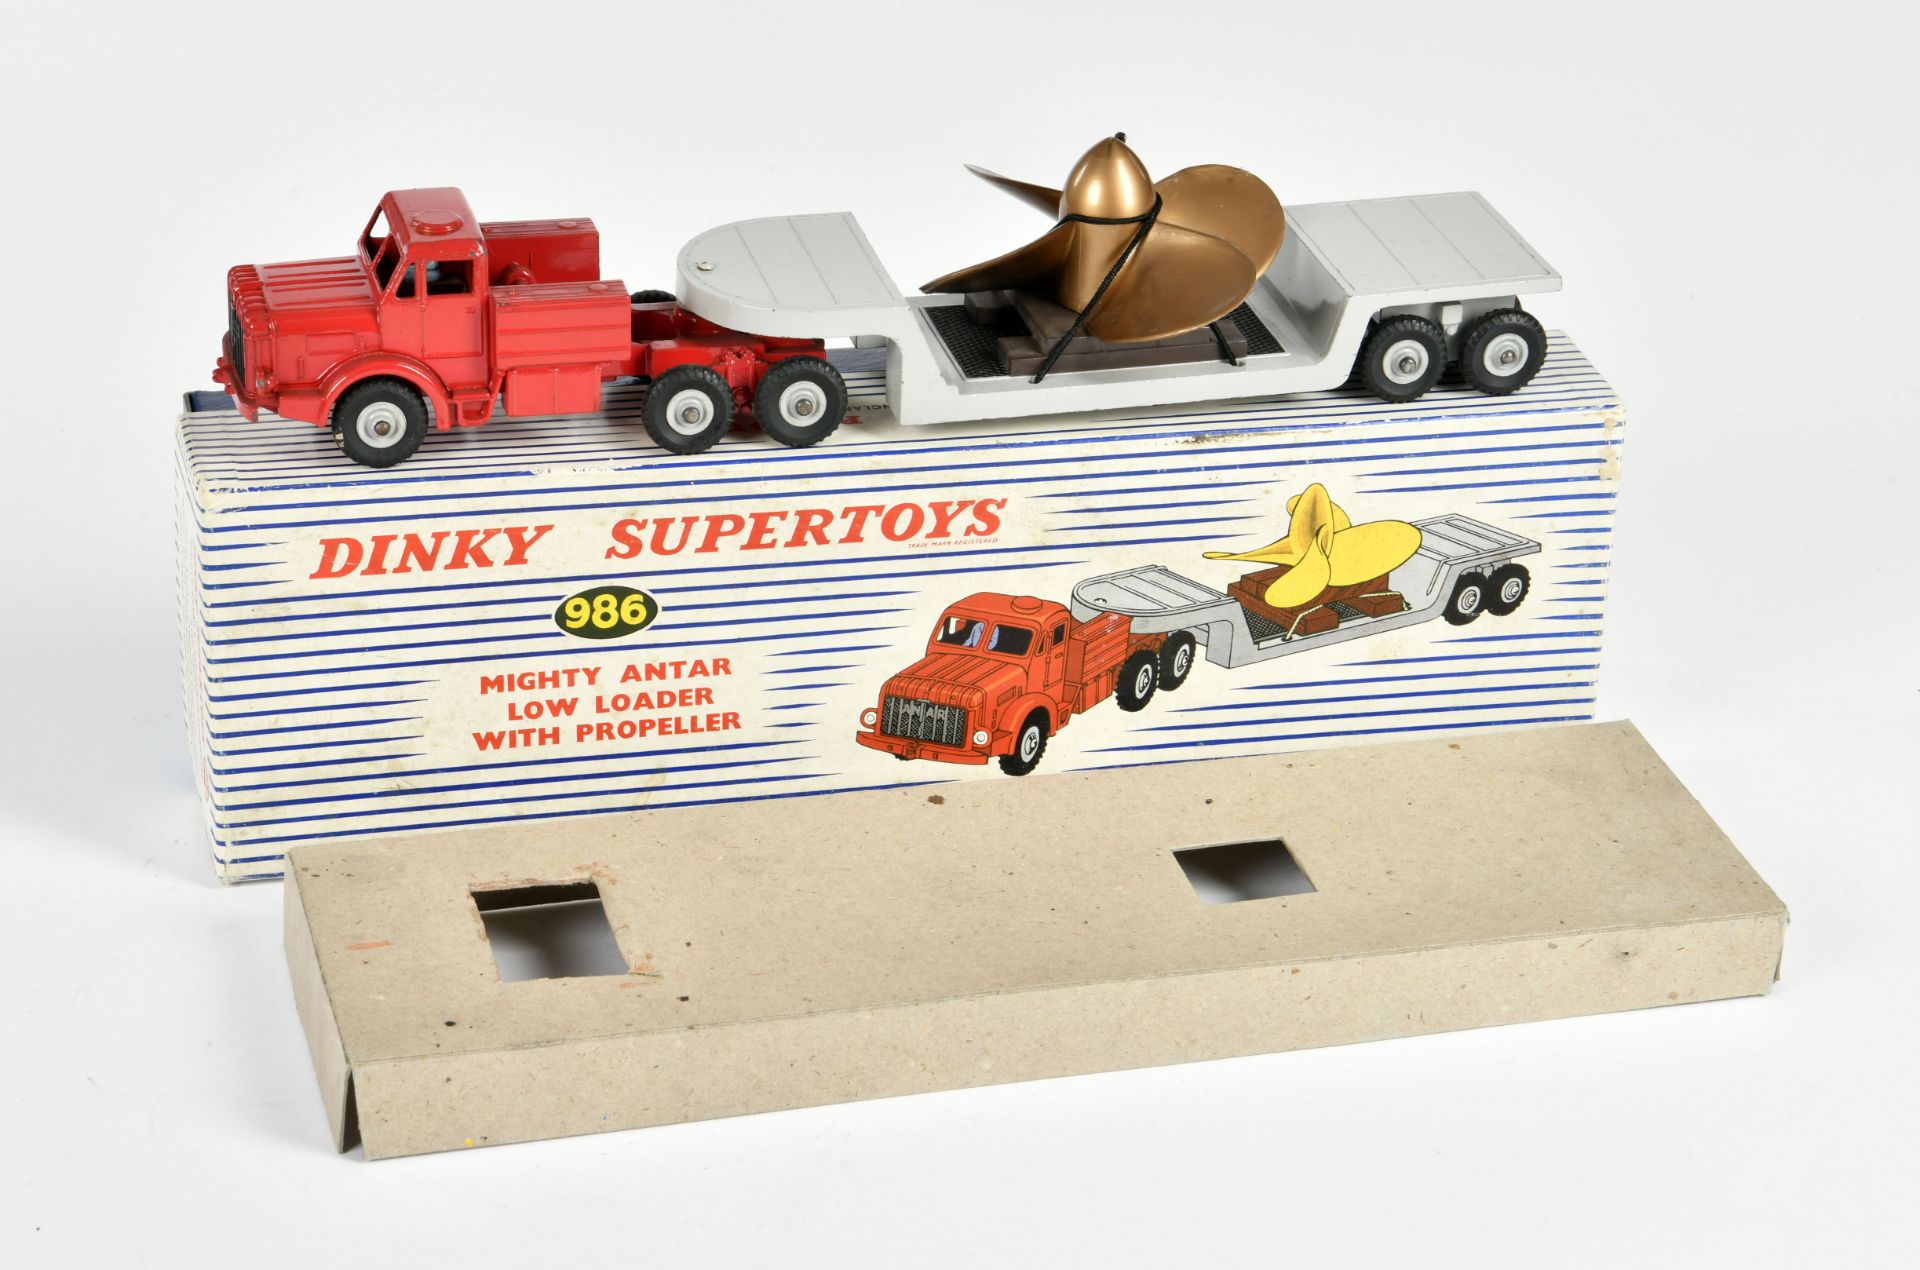 Dinky Supertoys, 986 Mighty Antar Low Loader With Propeller, England, diecast, box, min. paint d., C